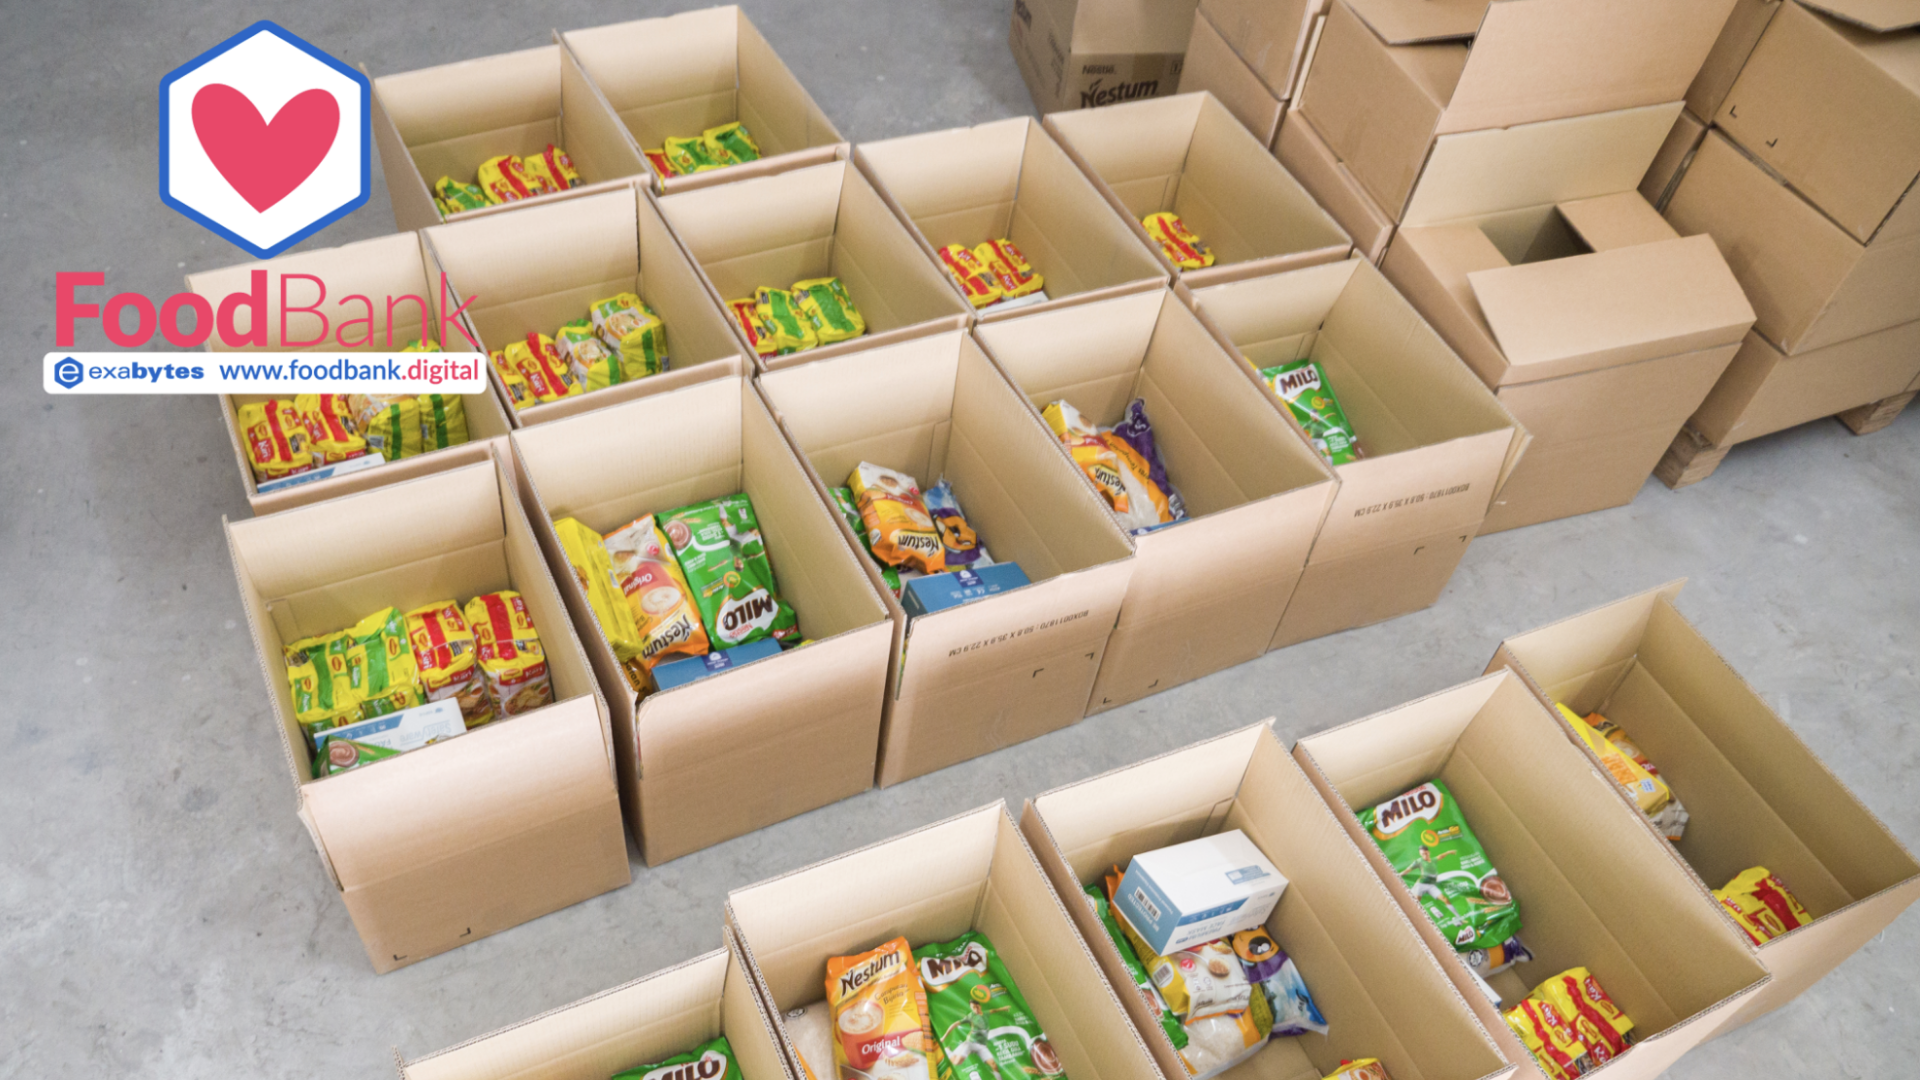 We Are Joining Forces to Help Over 51,000 Families via FoodBank.Digital | EasyStore